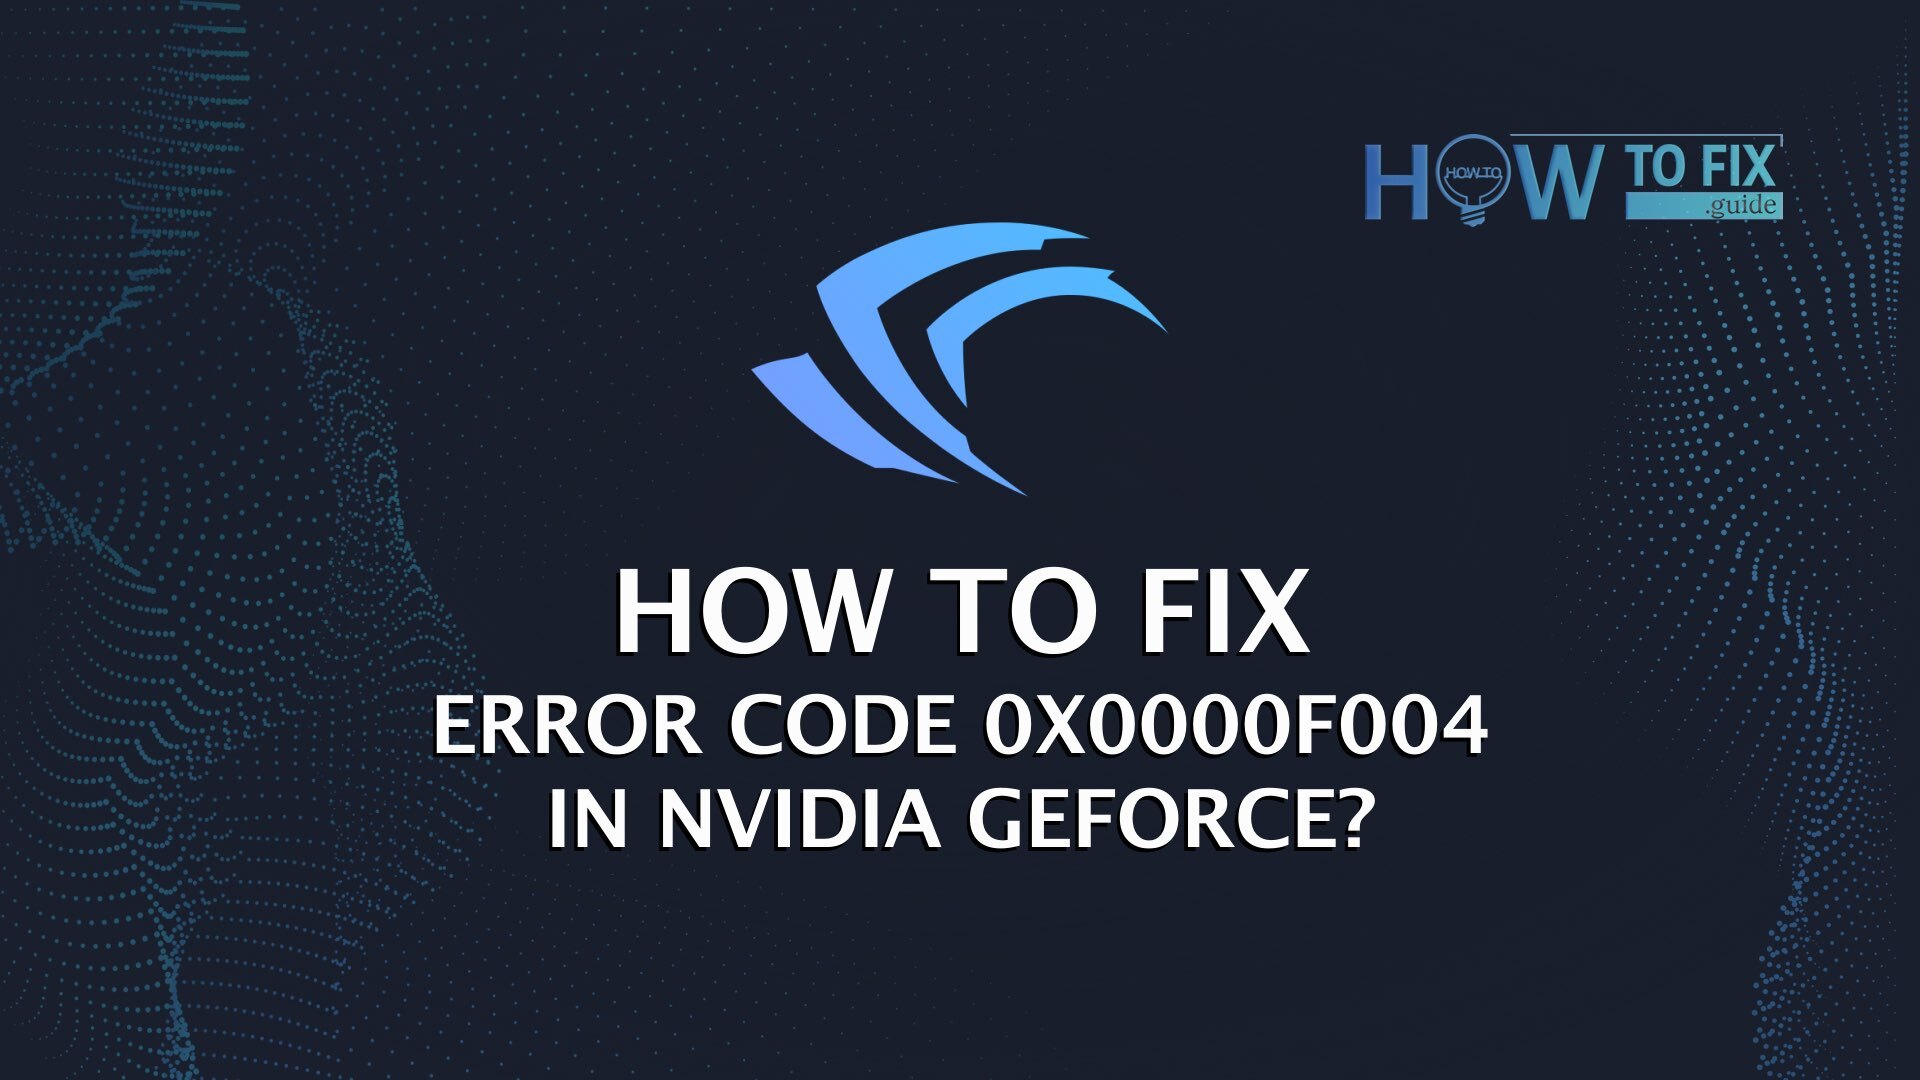 How to Fix Error Code 0X0000F004 in NVIDIA GeForce Now